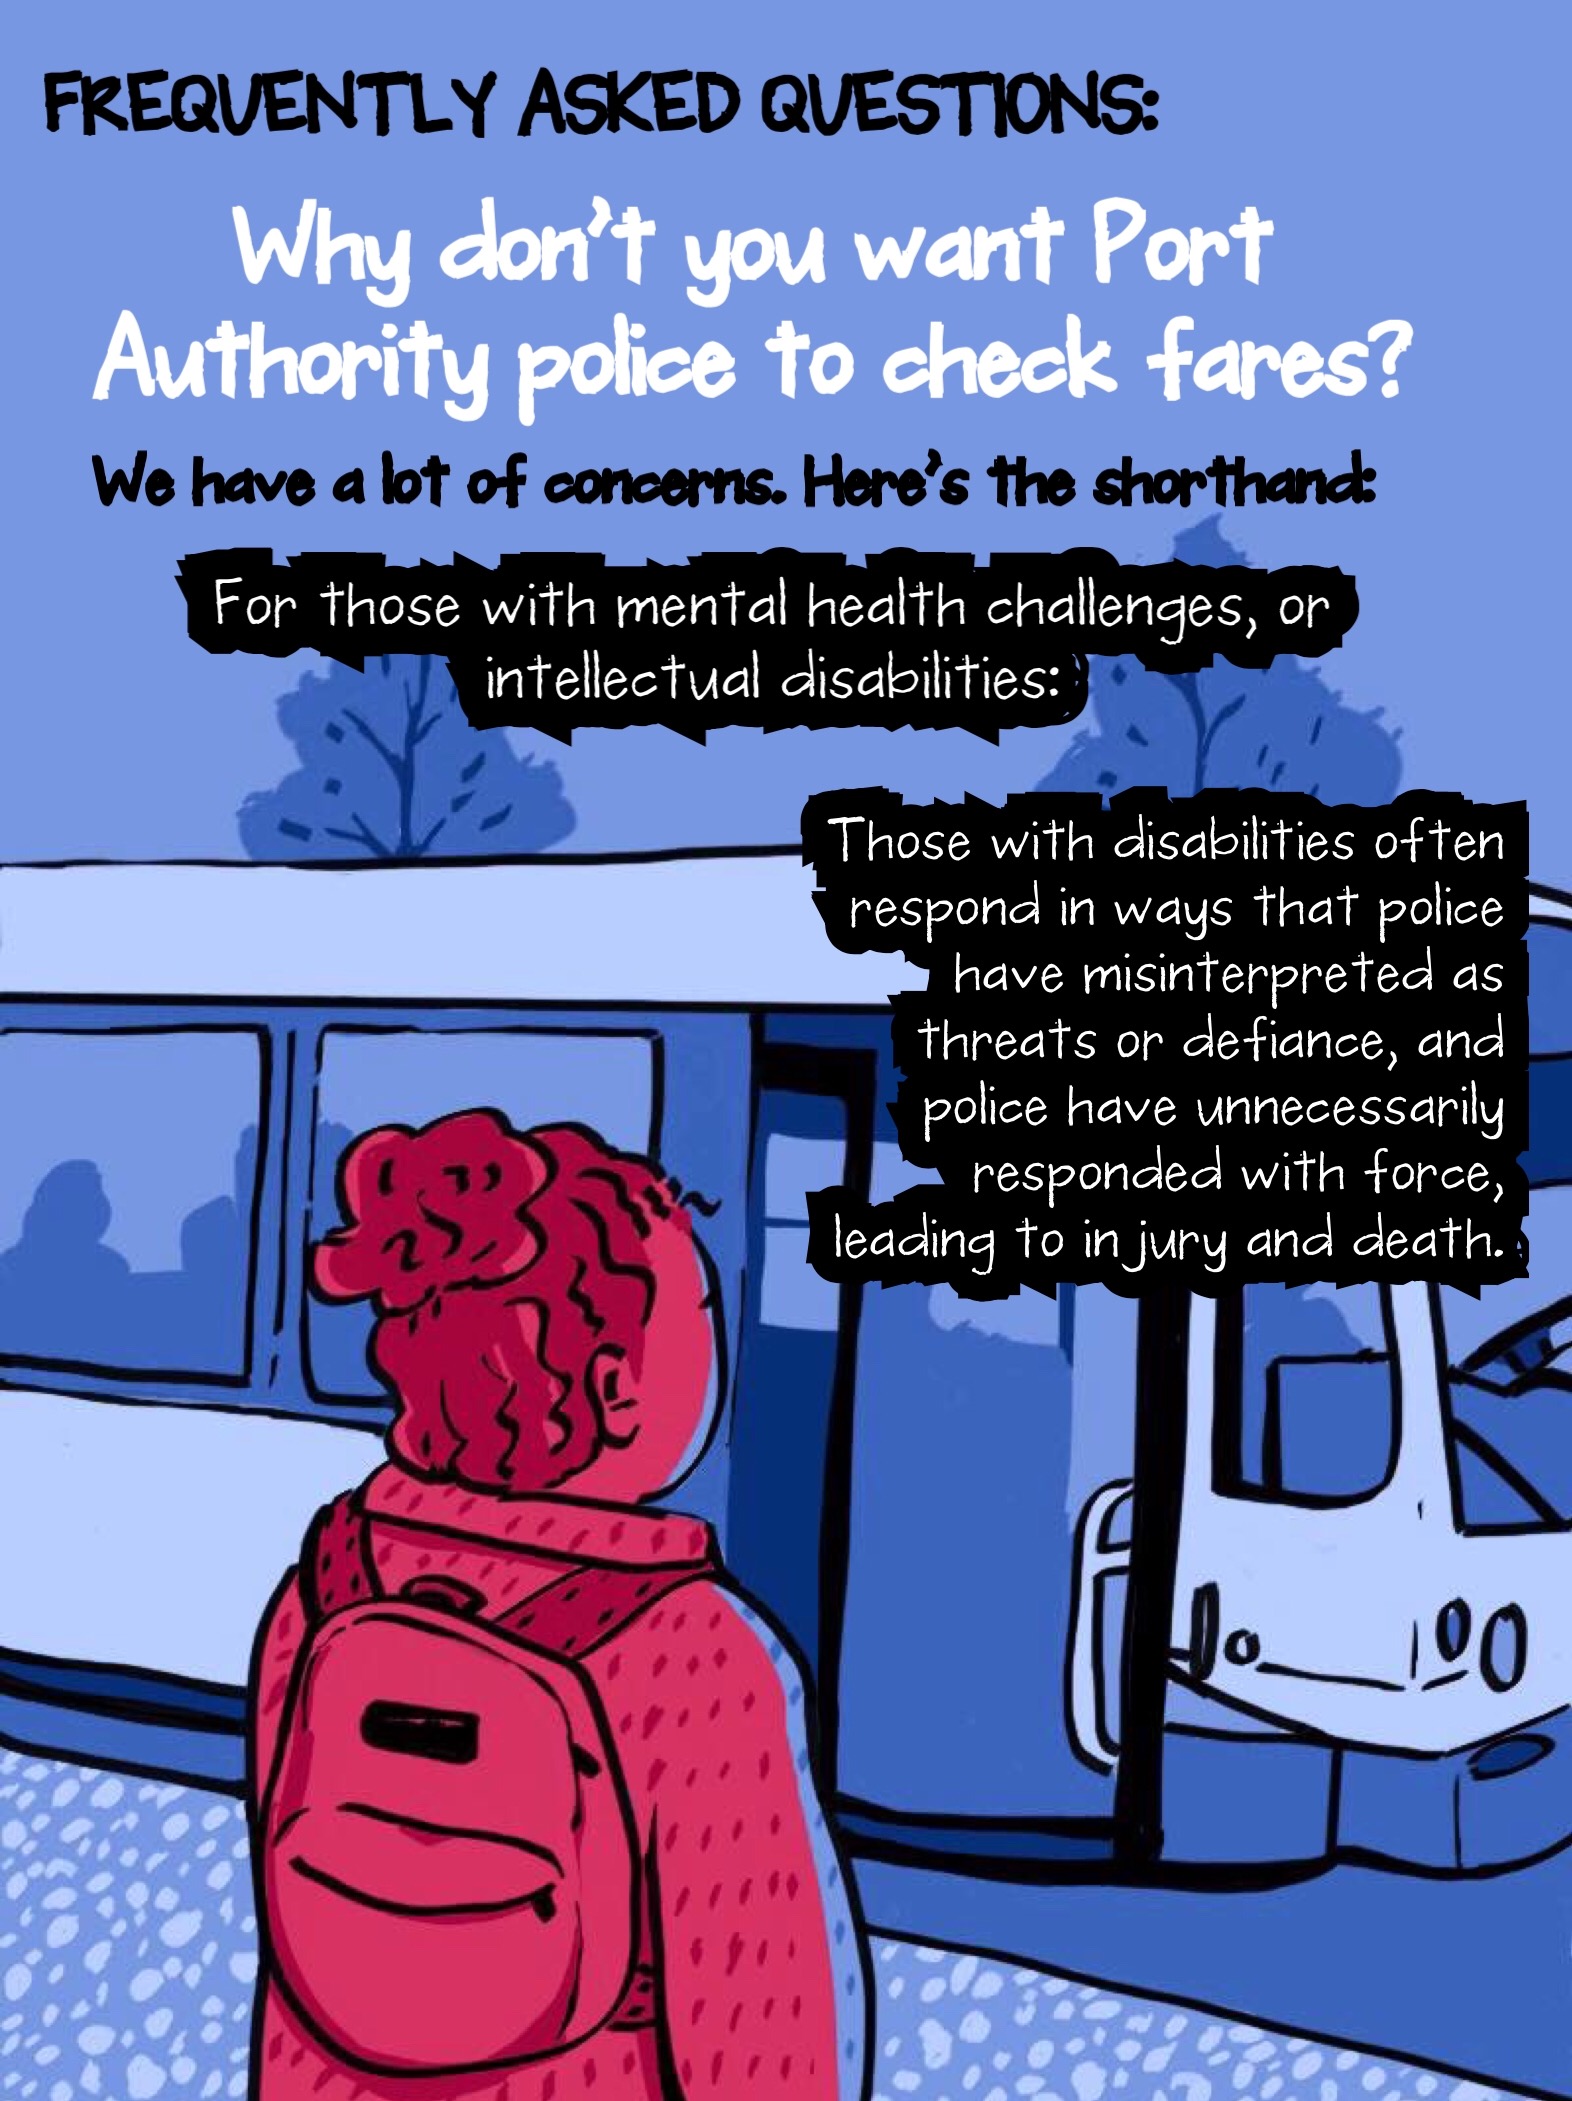 mental health - FAQ about Port Authority's Proposed "Proof of Payment" Fare Enforcement